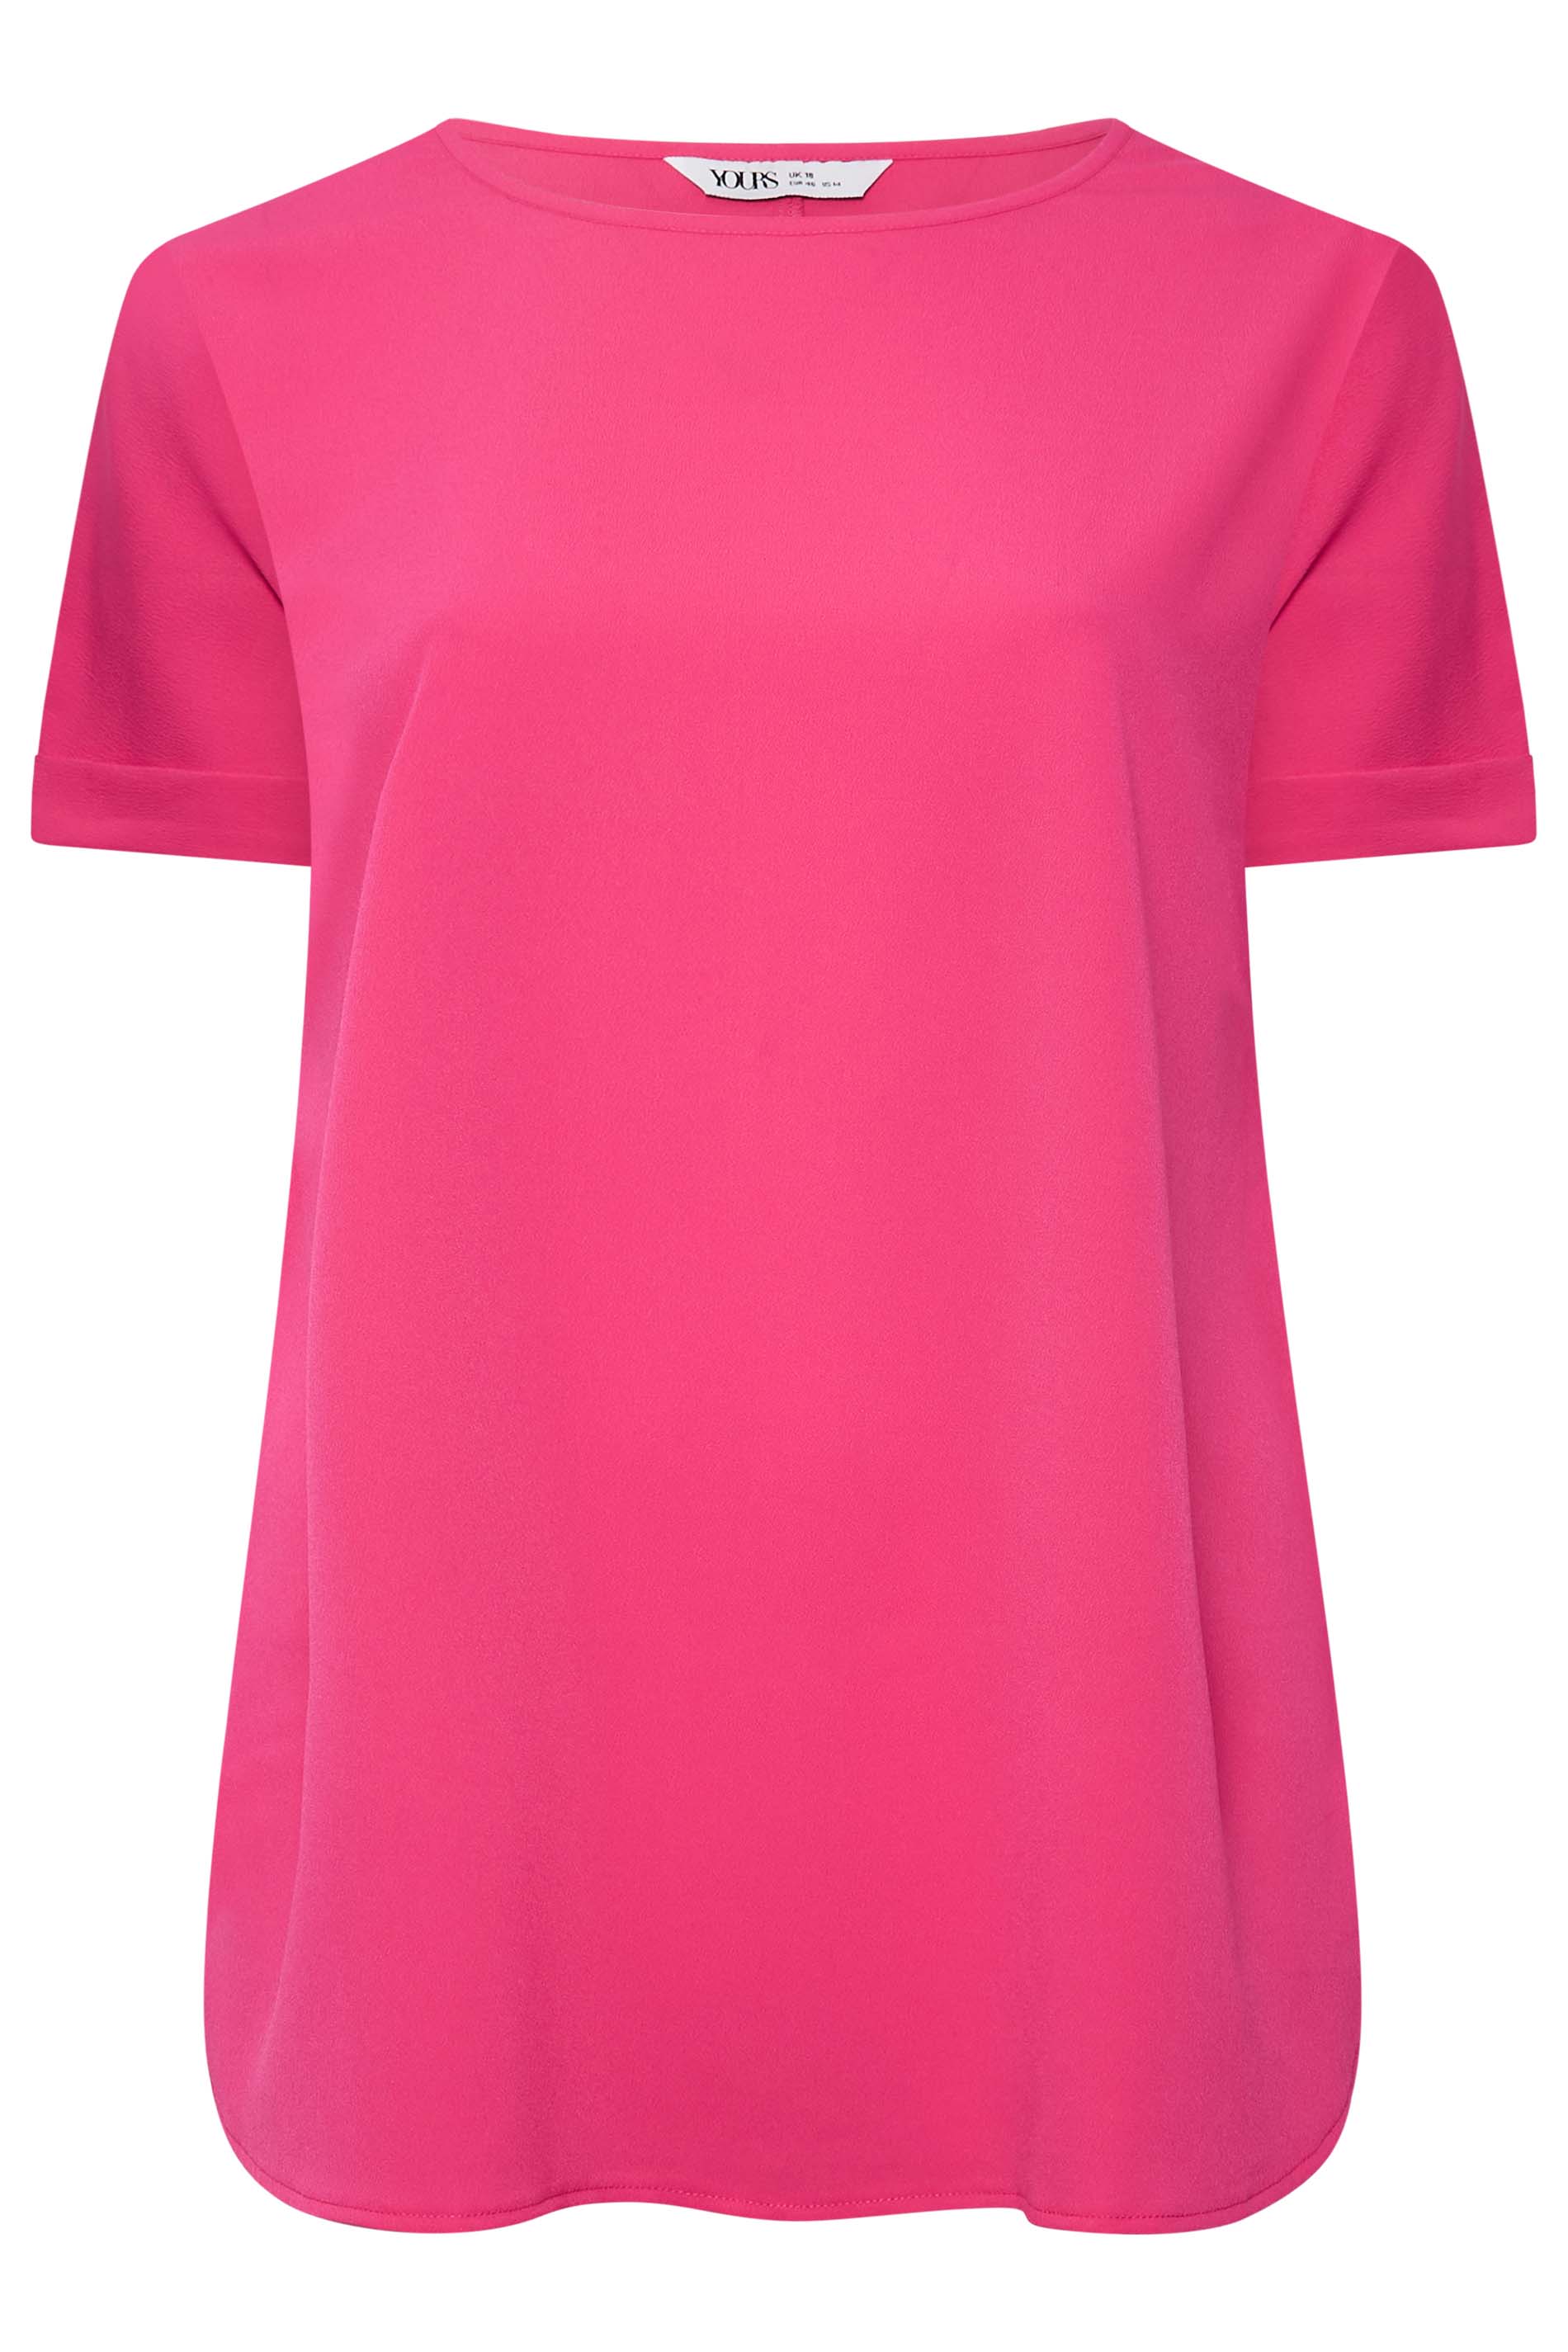 YOURS Plus Size Hot Pink Short Sleeve Boxy Top | Yours Clothing